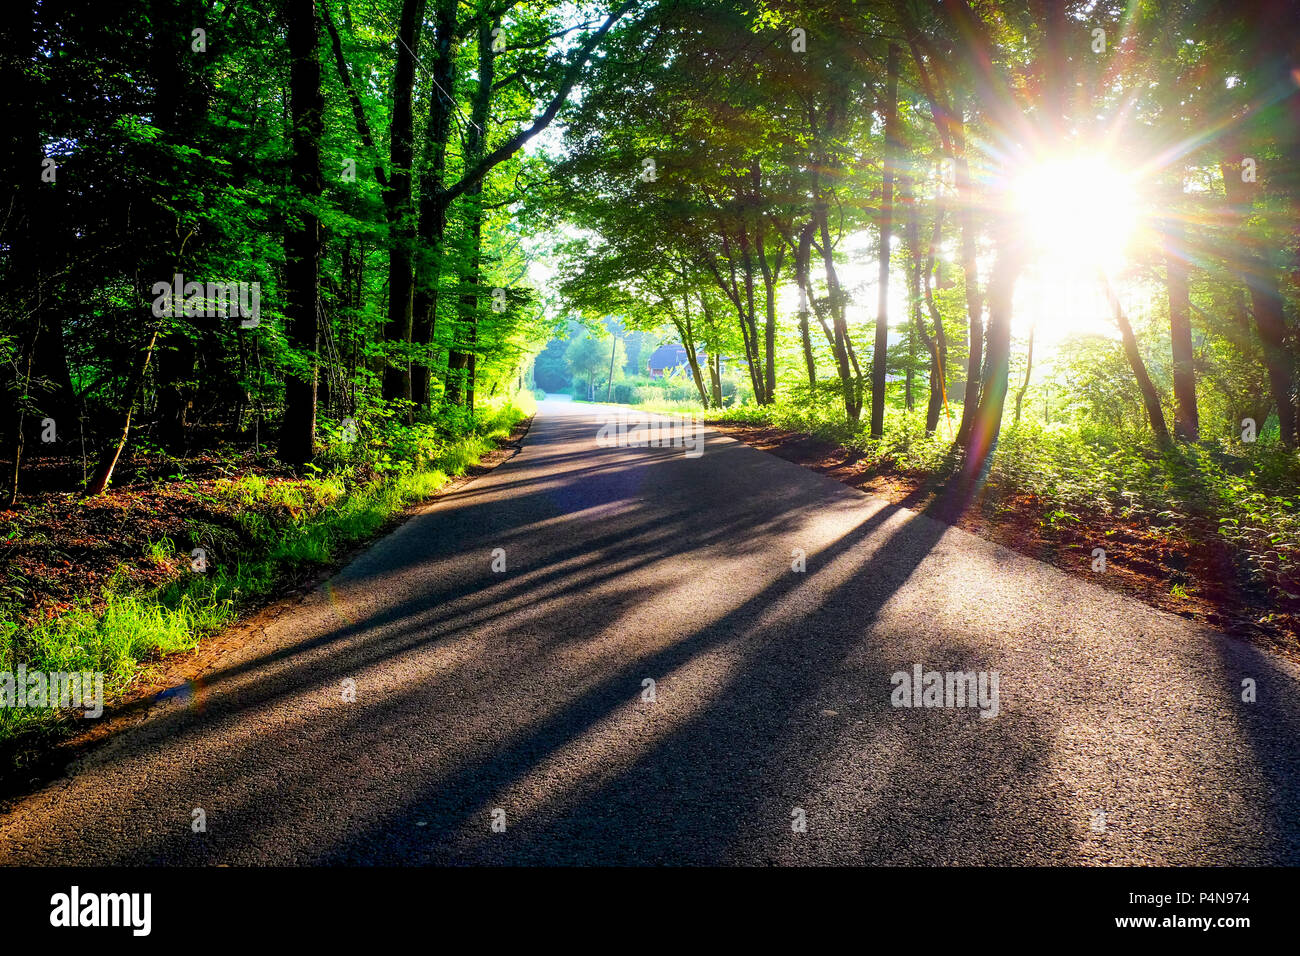 An English country lane in summer time with a curve to the left, green lush trees on each side the sun is low and shining through the trees casting lo Stock Photo